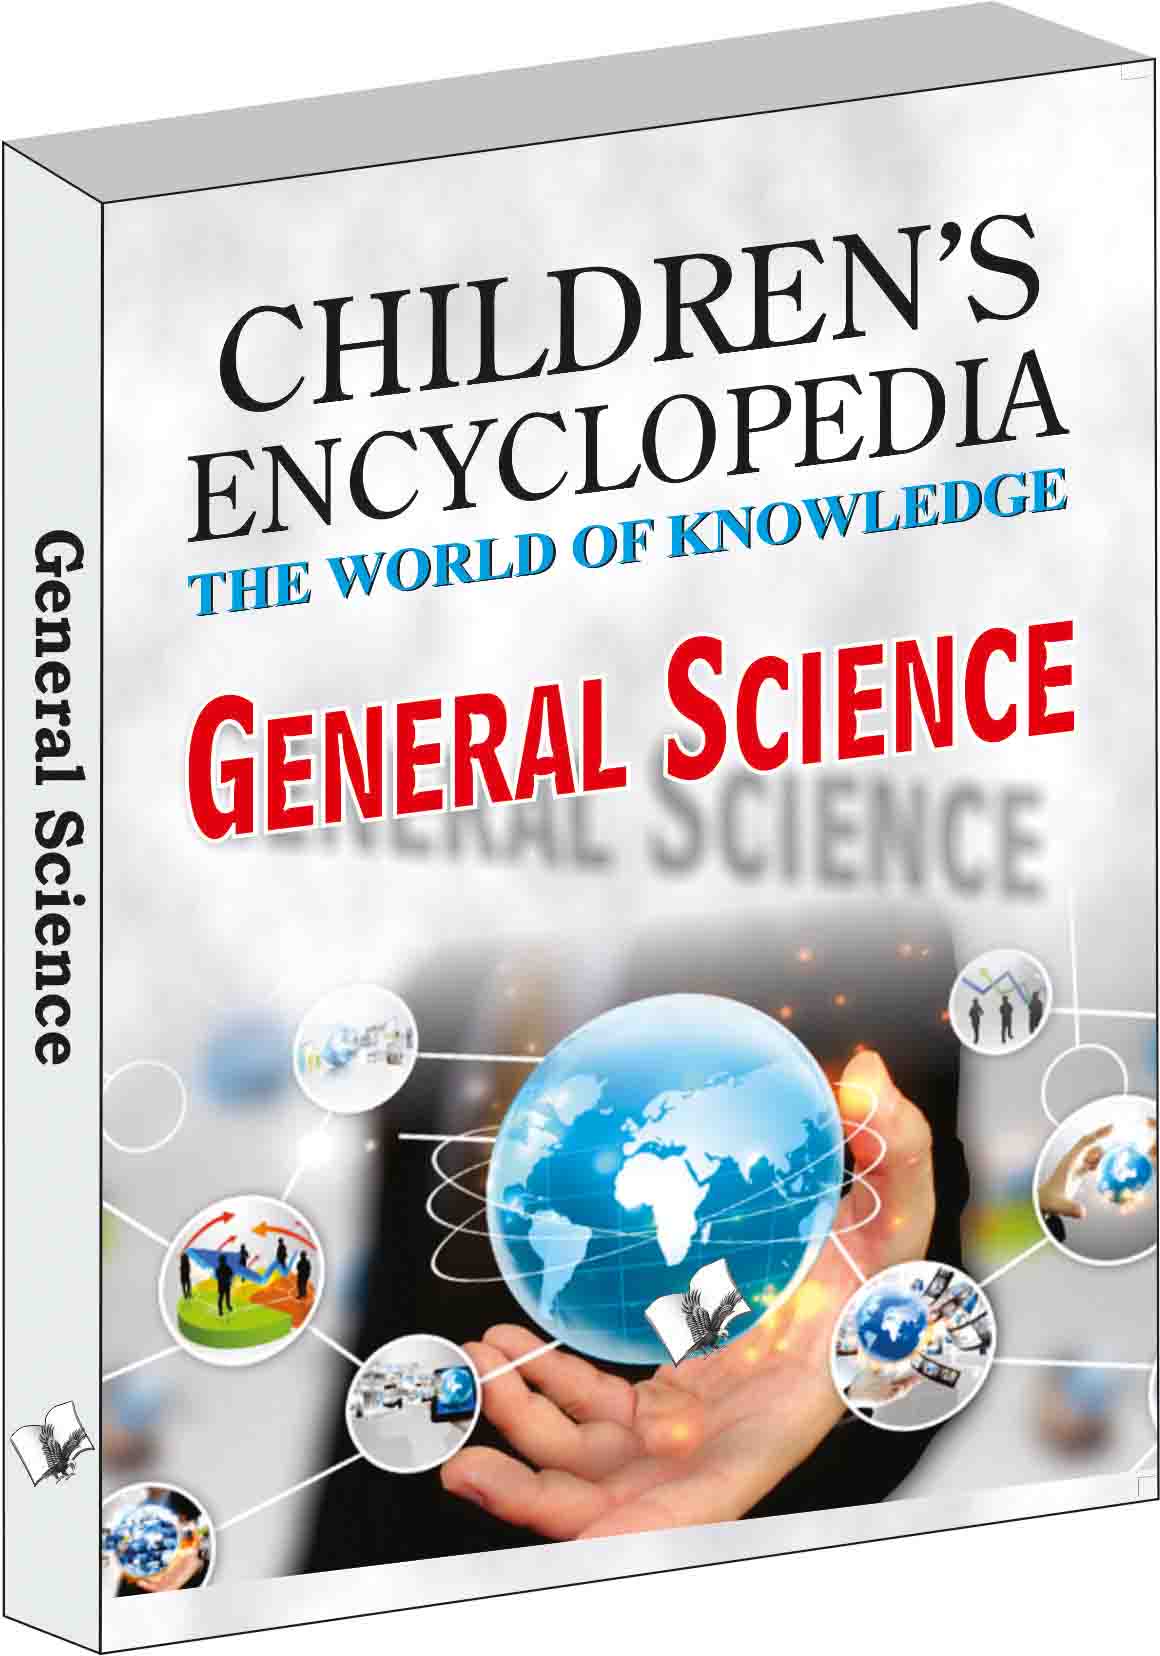 Children's Encyclopedia -  General Science-The World of Knowledge